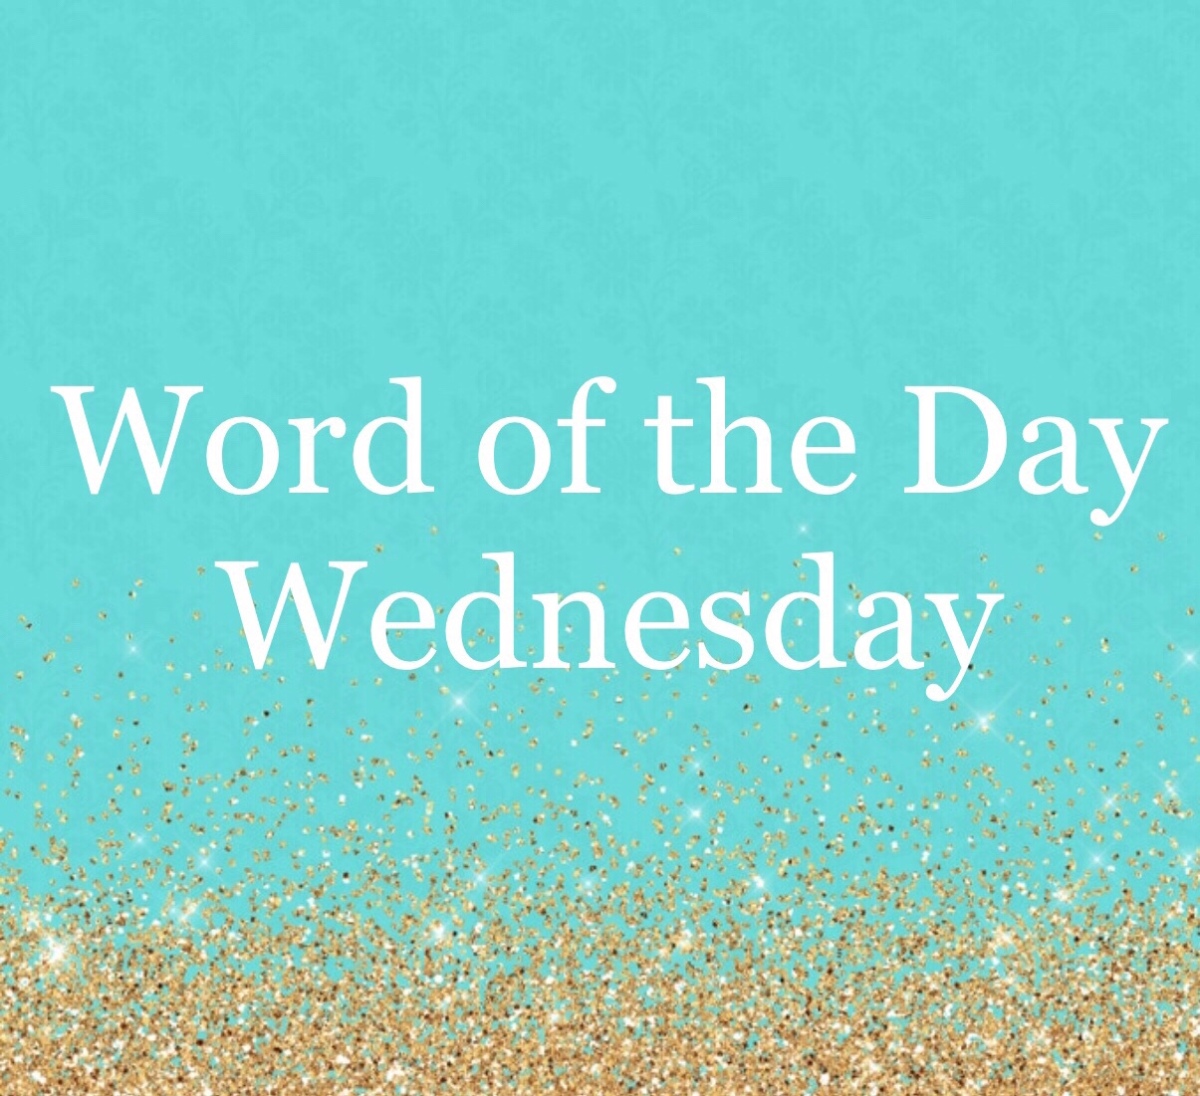 Word of the Day Wednesday